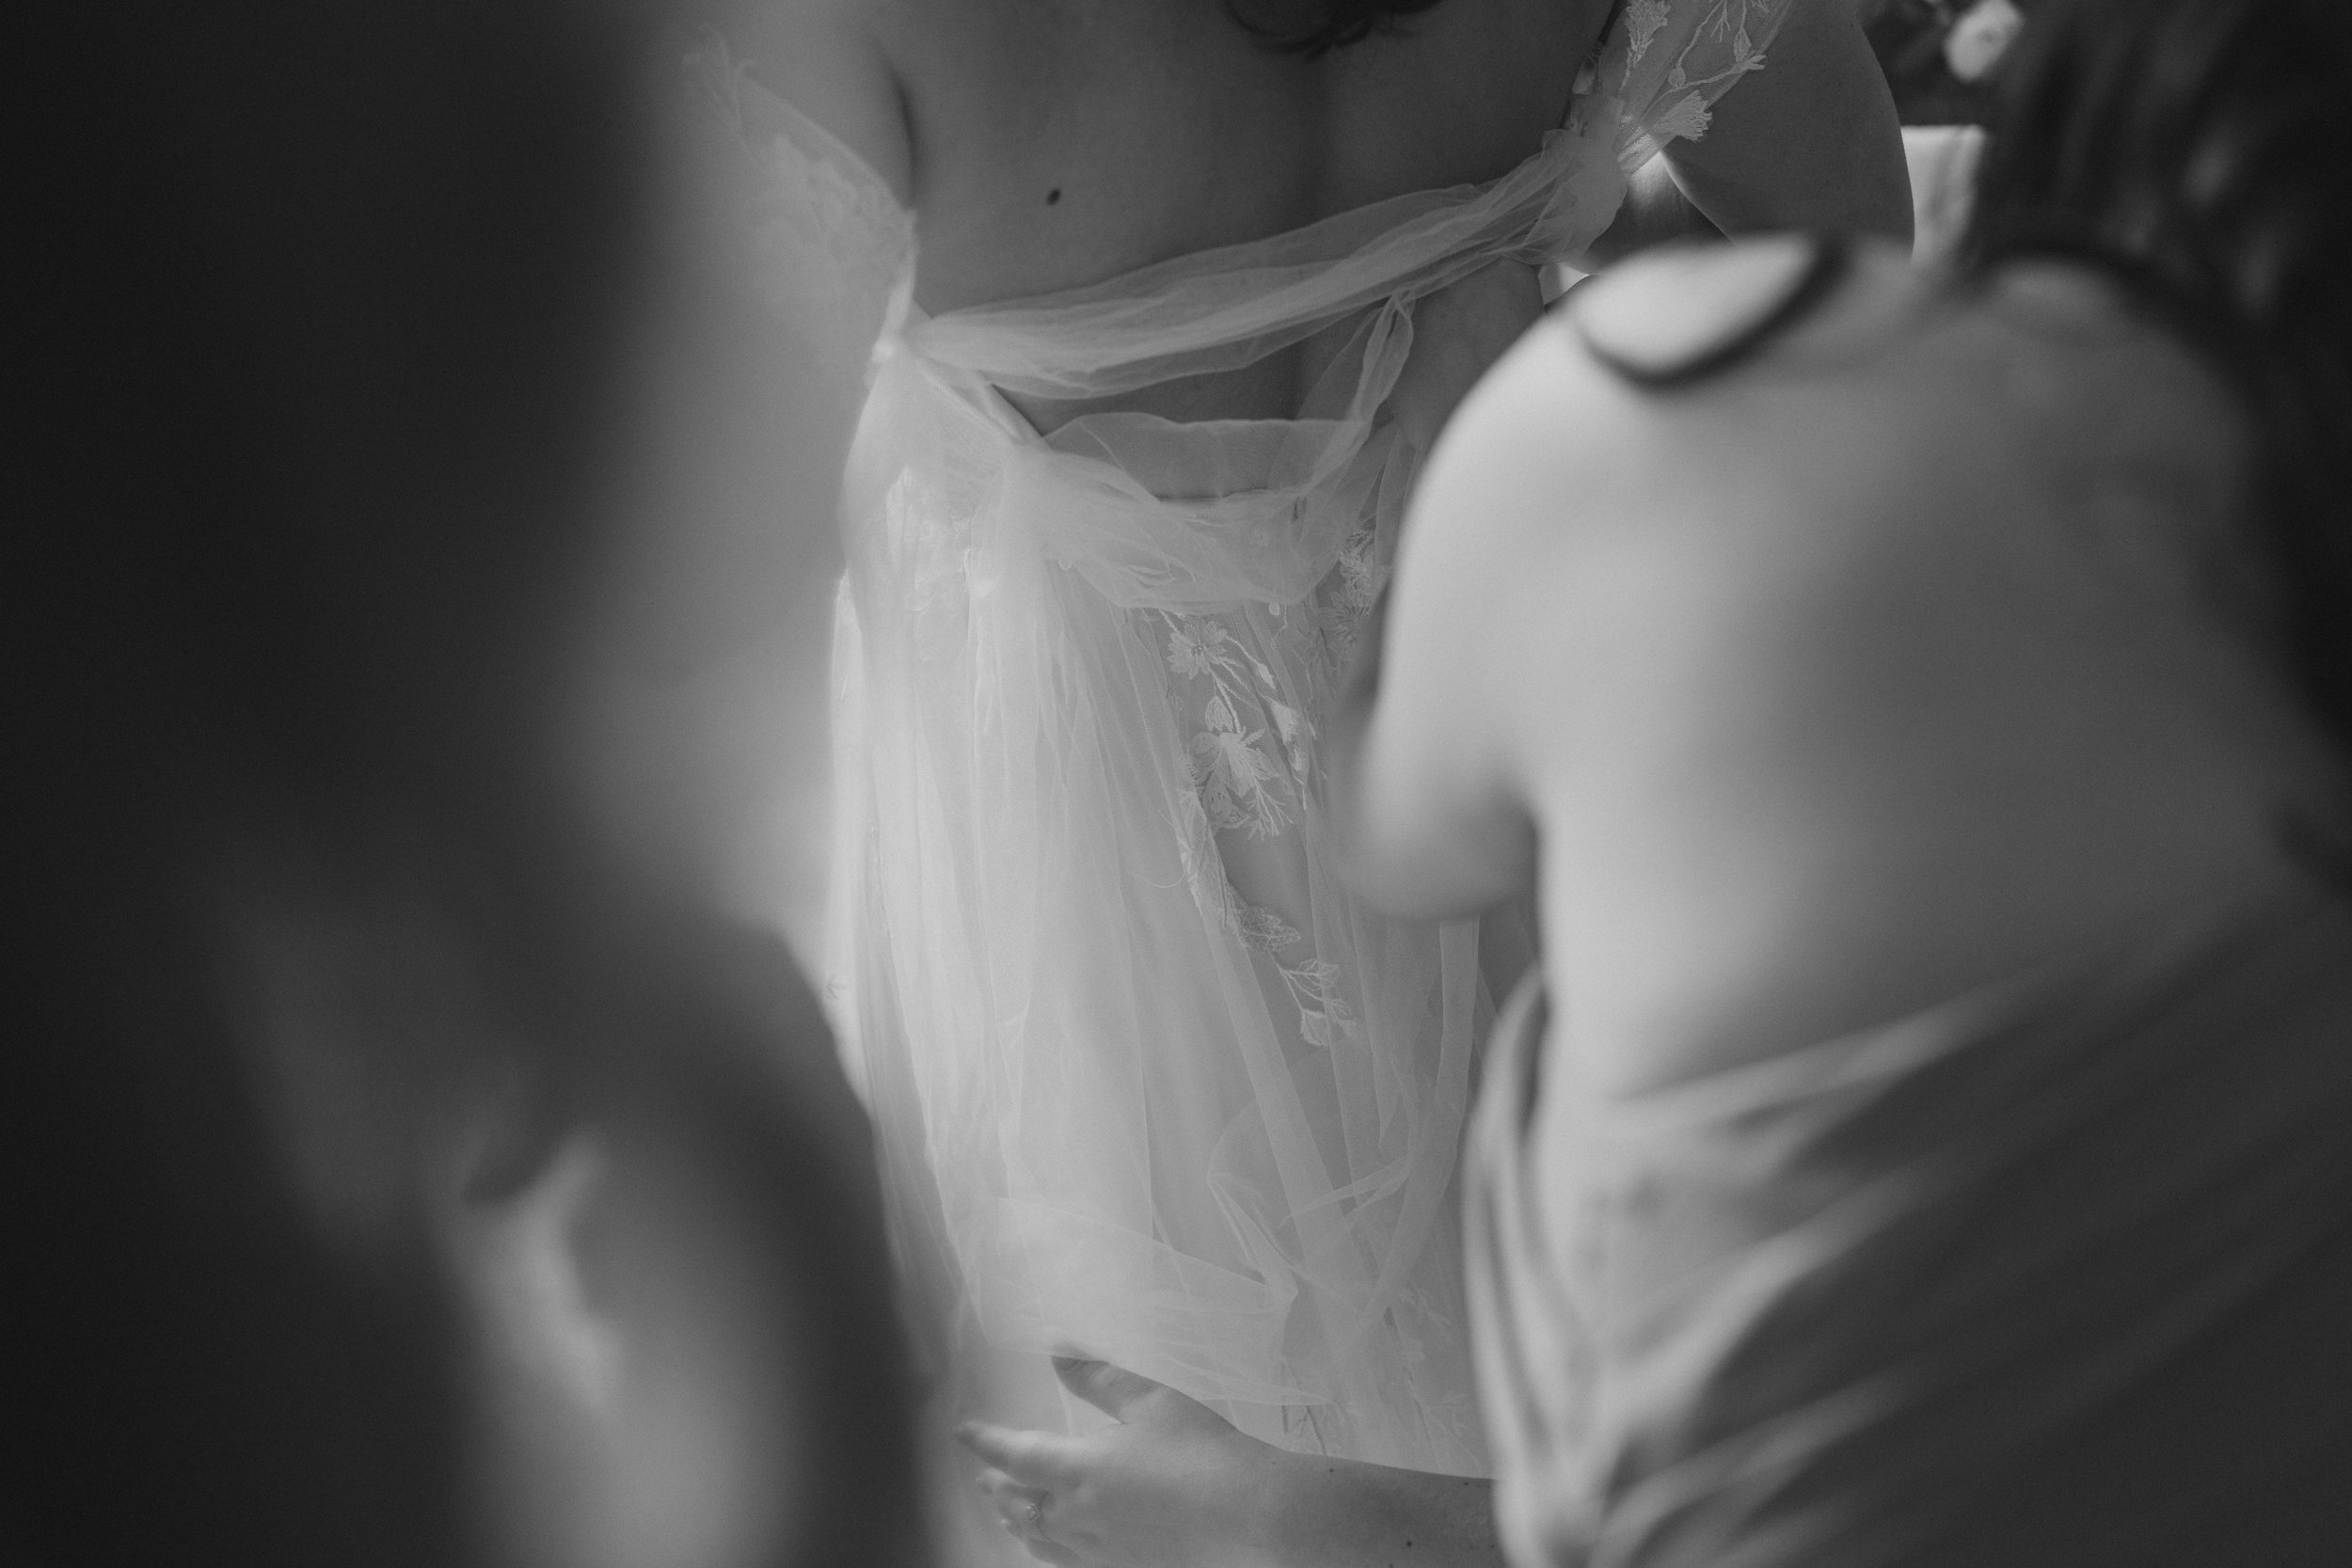 HODSOCK PRIORY WEDDING PHOTOGRAPHY - the detail of the brides dress